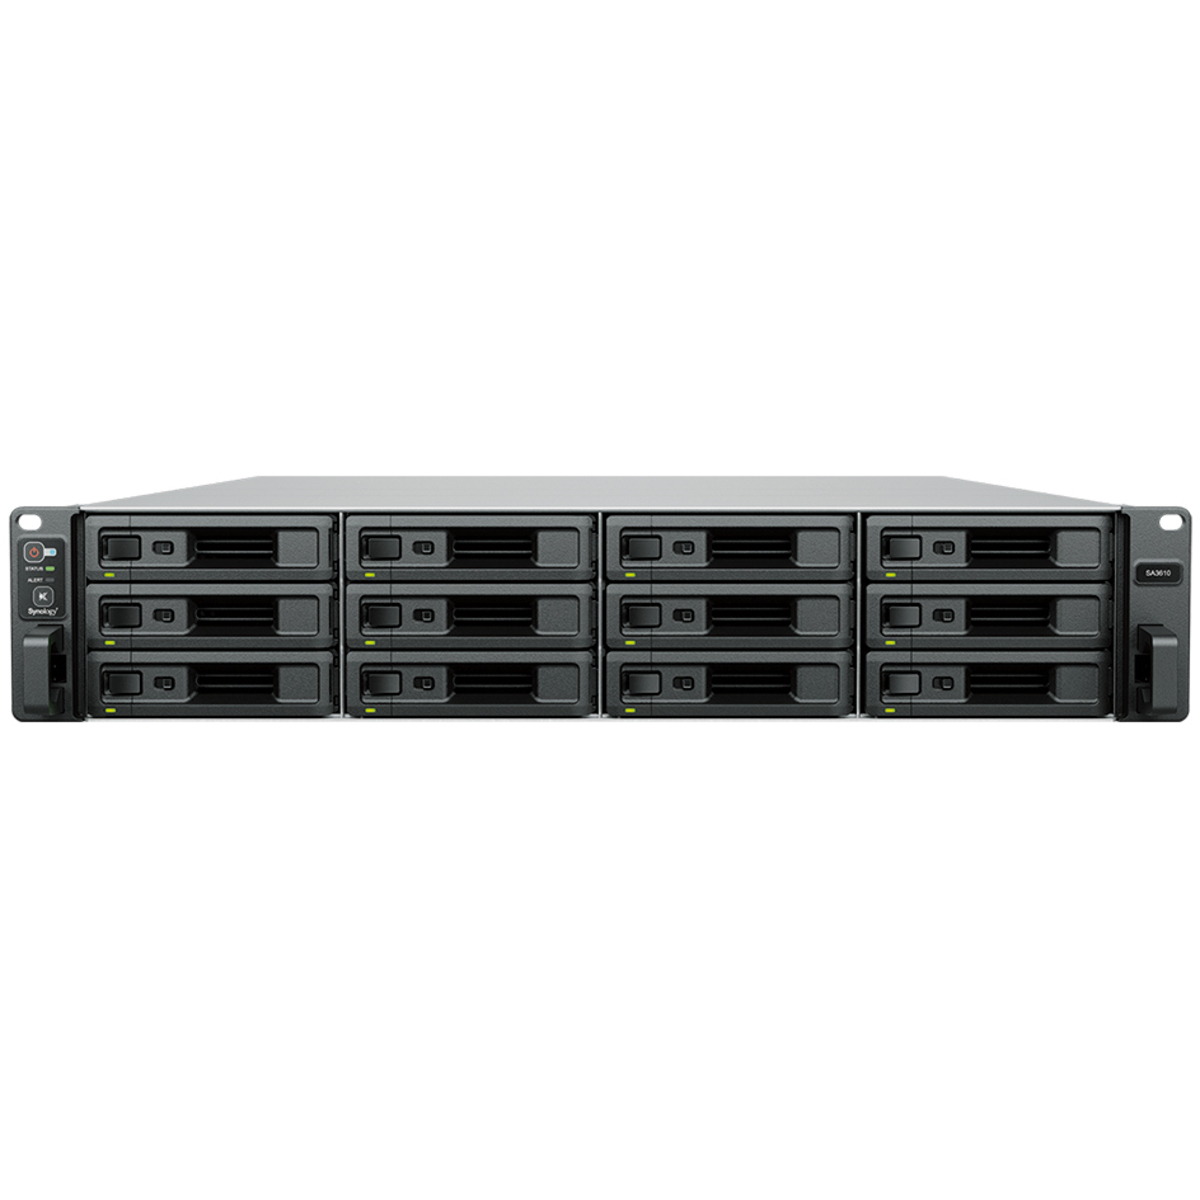 Synology RackStation SA3410 54tb 12-Bay RackMount Large Business / Enterprise NAS - Network Attached Storage Device 9x6tb Seagate EXOS 7E10 ST6000NM019B 3.5 7200rpm SATA 6Gb/s HDD ENTERPRISE Class Drives Installed - Burn-In Tested RackStation SA3410